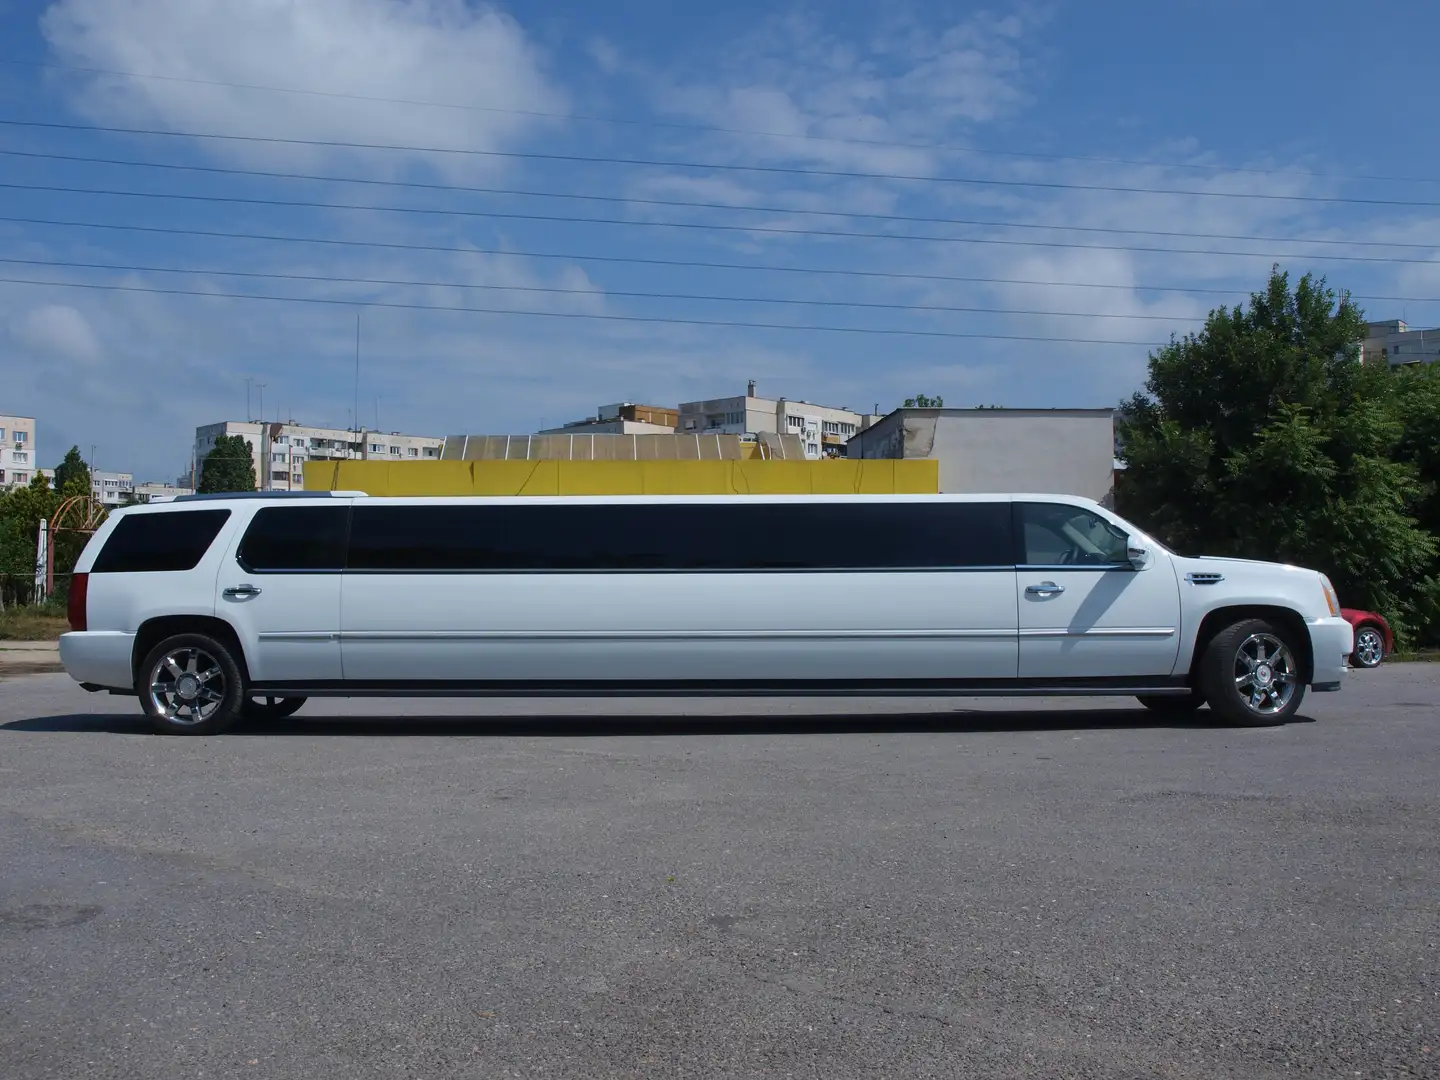 Cadillac Escalade 203-inch Stretch Limousine by Moonlight Industries Beyaz - 2